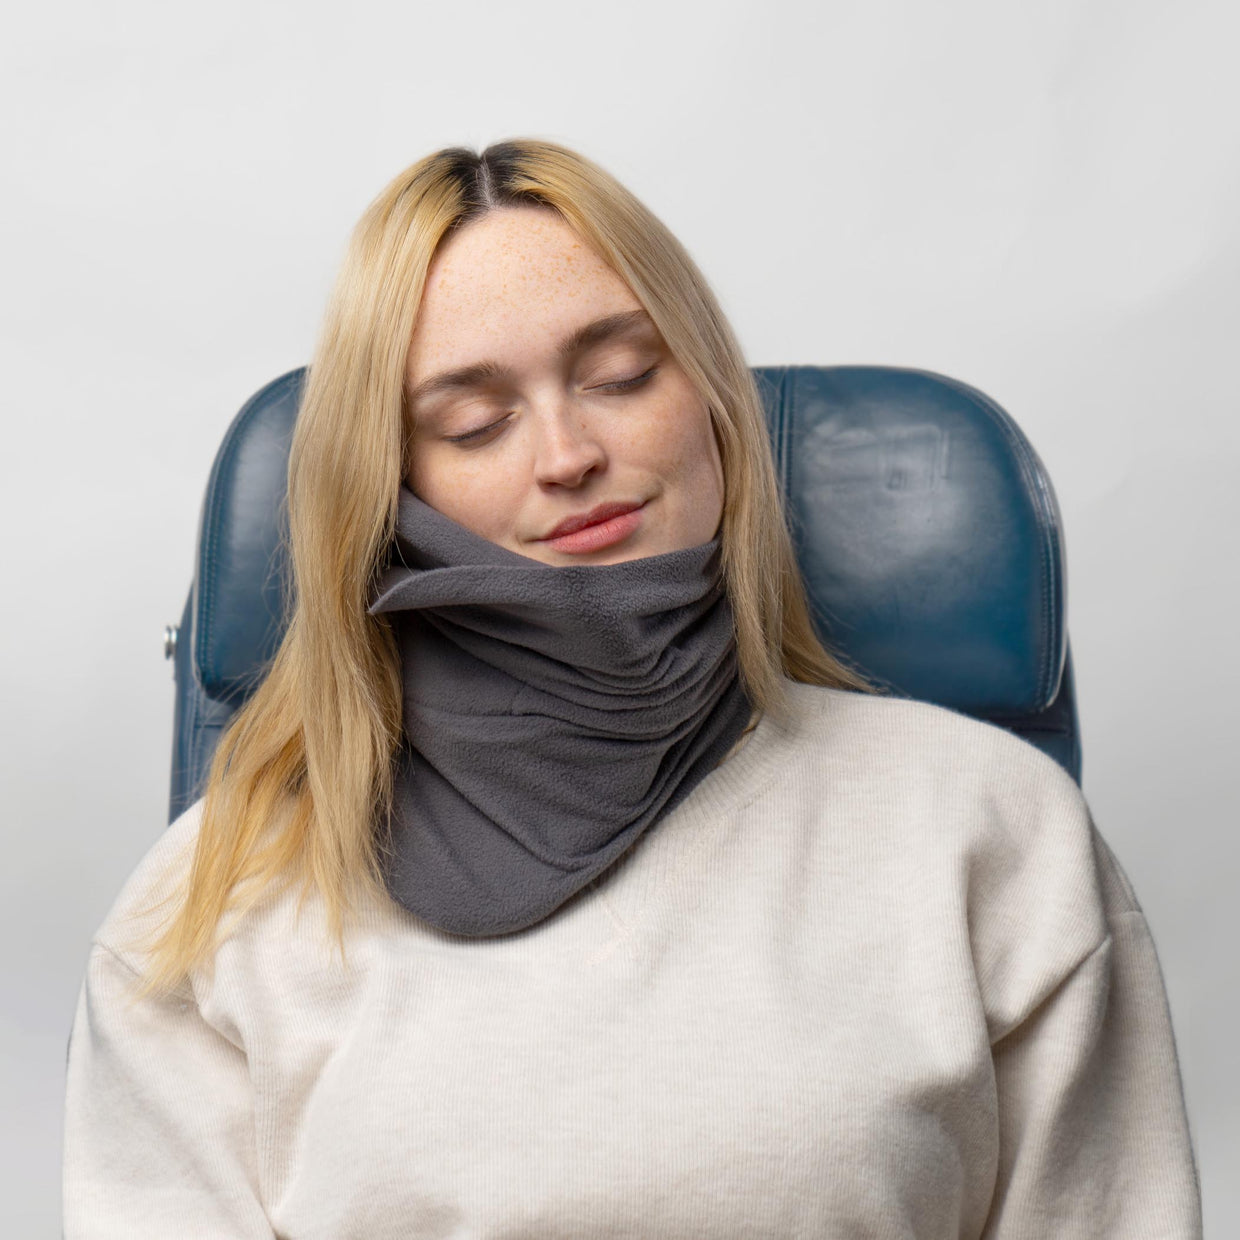 Best pillow for neck support during travel: TRTL Travel Pillow